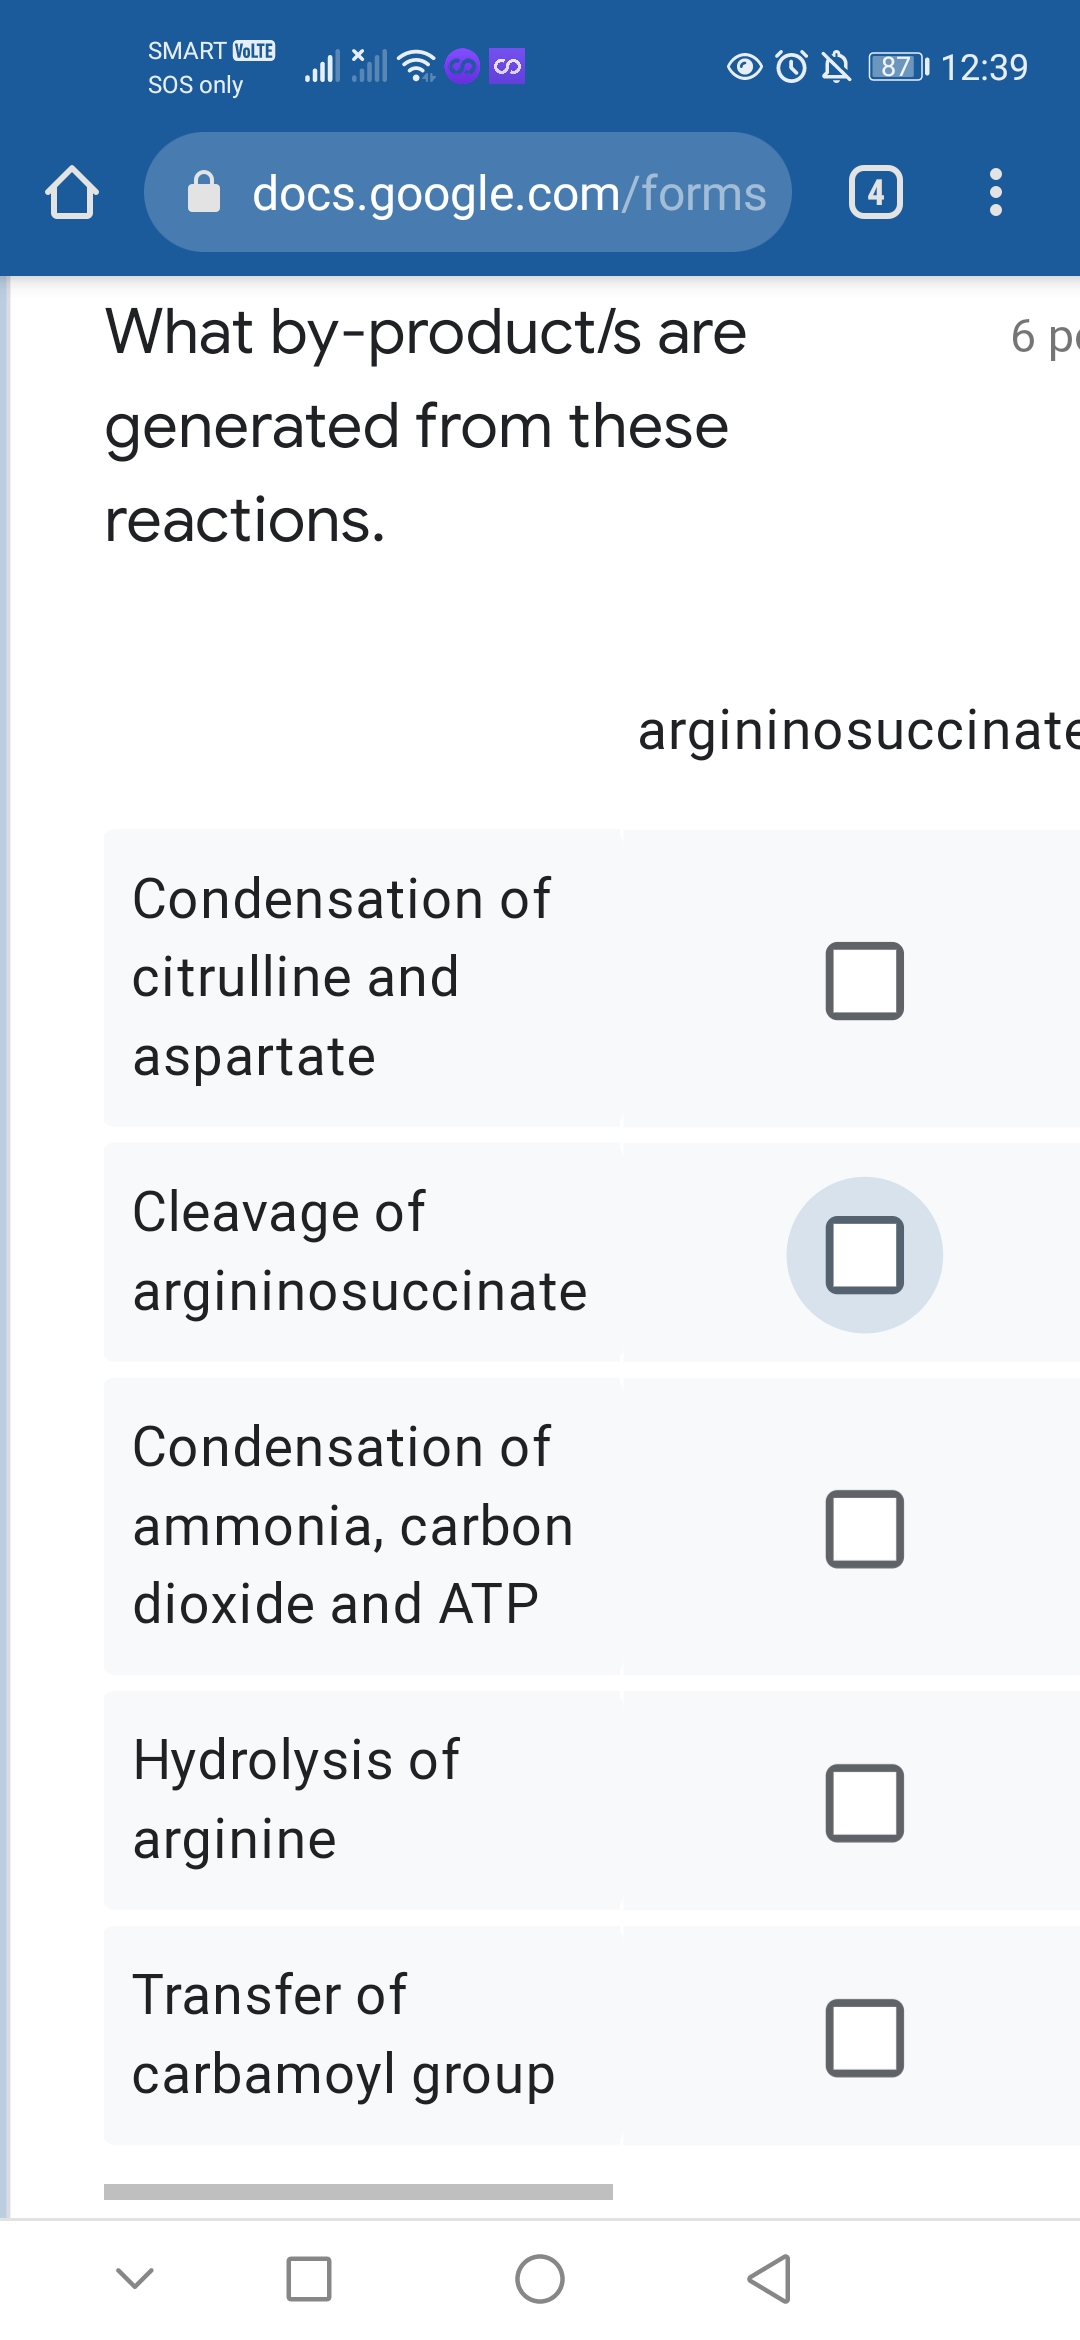 SMART VOLTE
O N 87I 12:39
SOS only
docs.google.com/forms
4
What by-product/s are
6 pe
generated from these
reactions.
argininosuccinate
Condensation of
citrulline and
aspartate
Cleavage of
argininosuccinate
Condensation of
ammonia, carbon
dioxide and ATP
Hydrolysis of
arginine
Transfer of
carbamoyl group
S
<>
